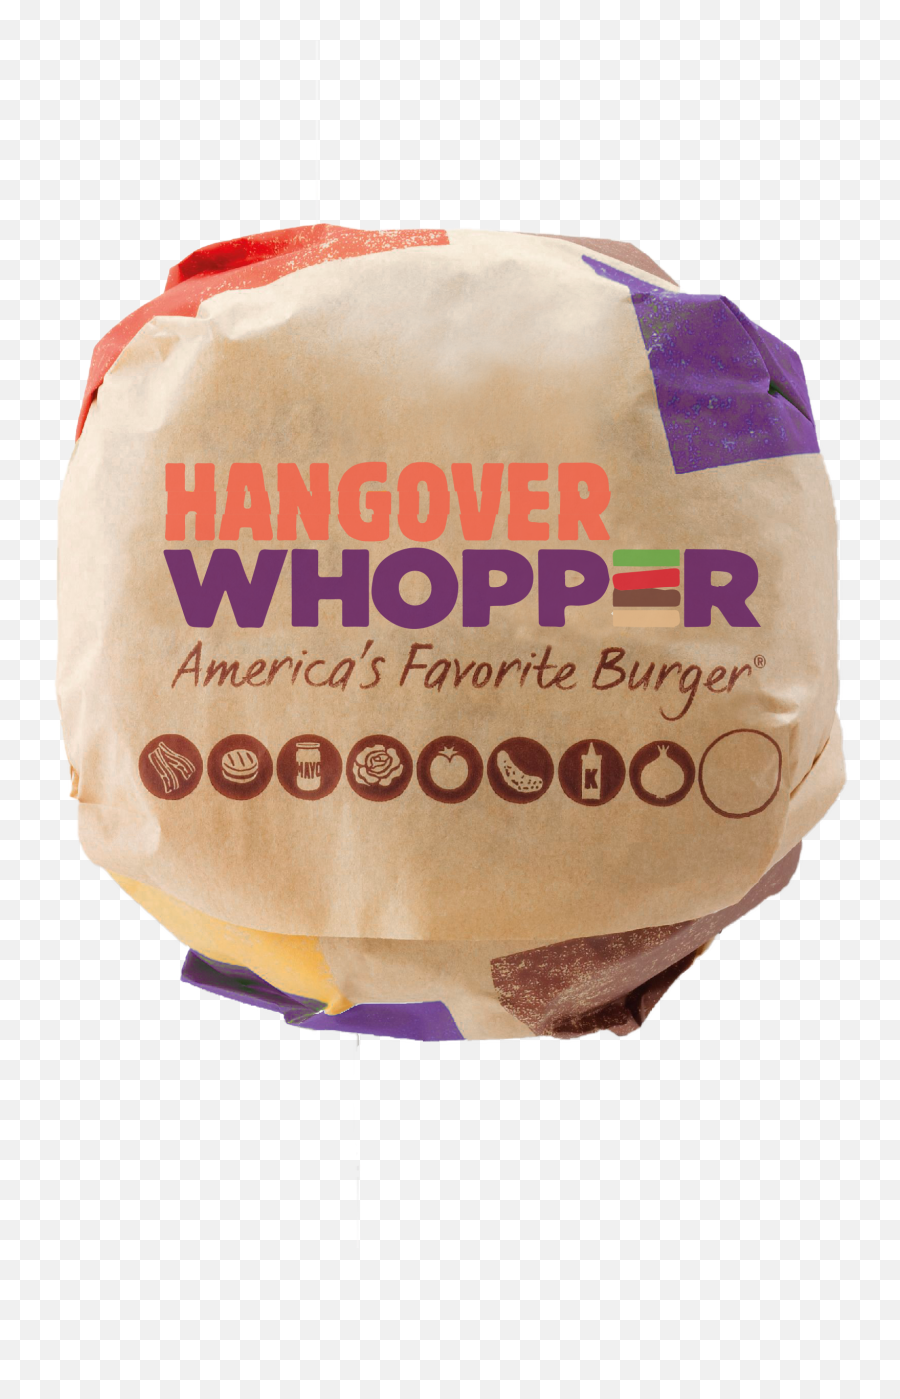 Burger King Integrated Advert By The Hangover Whopper Png